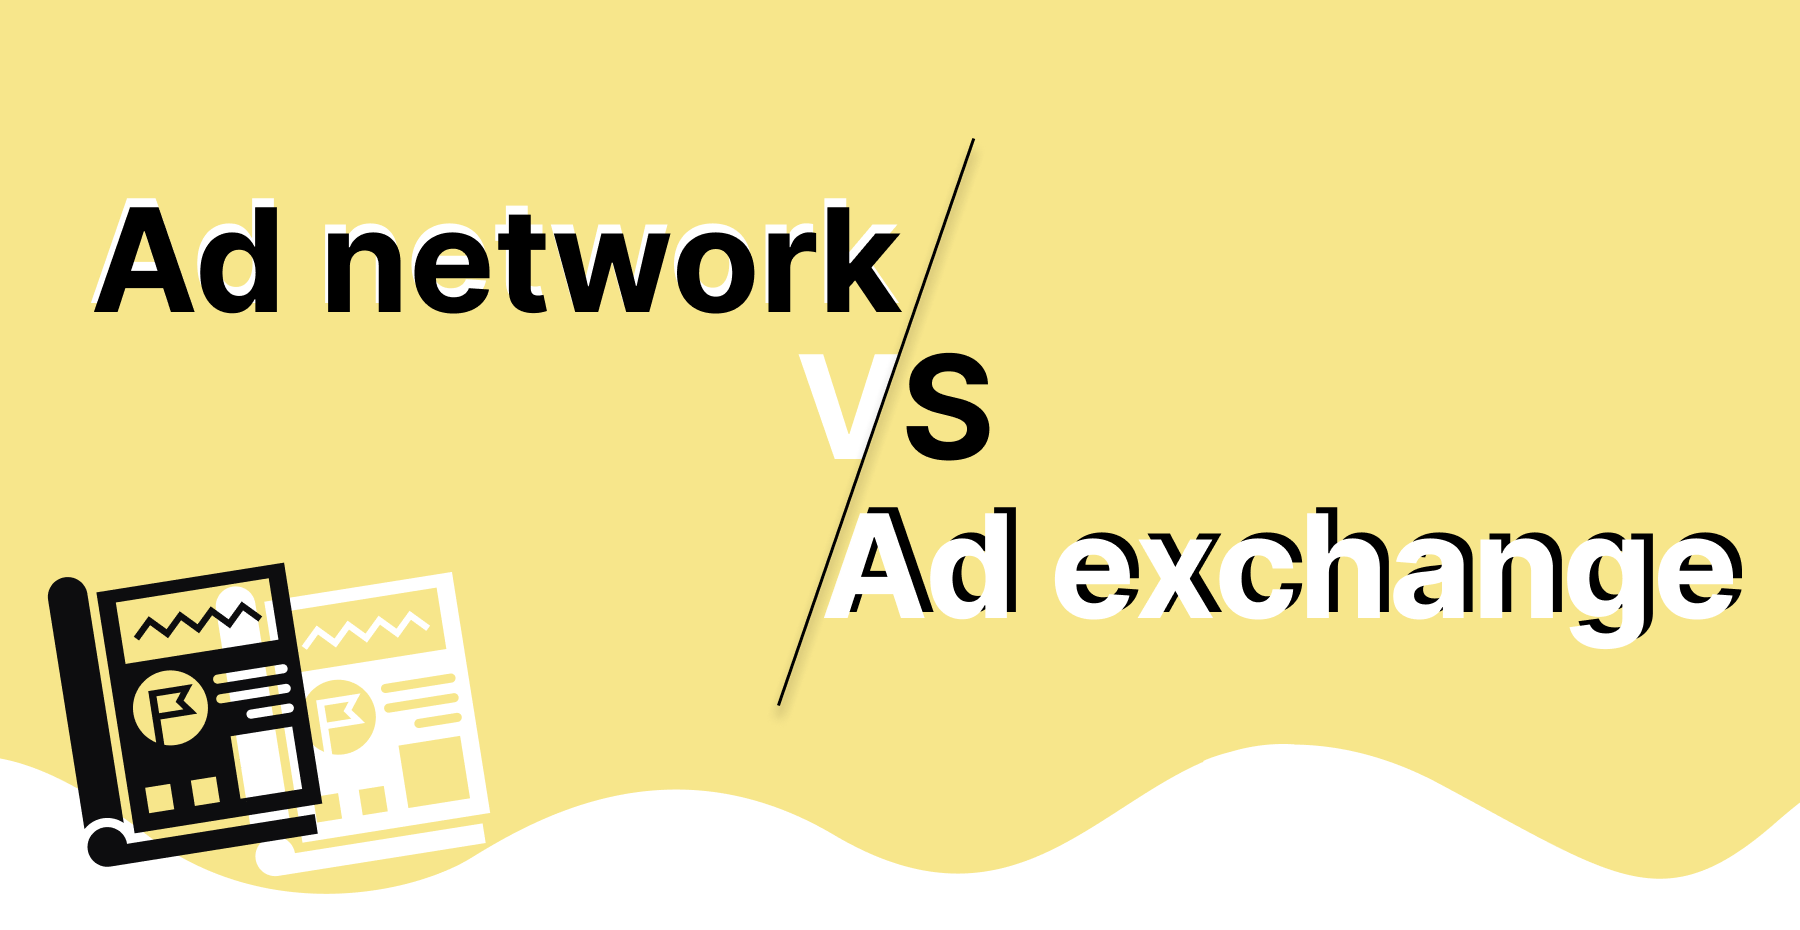 Big Difference: Ad network vs Ad exchange